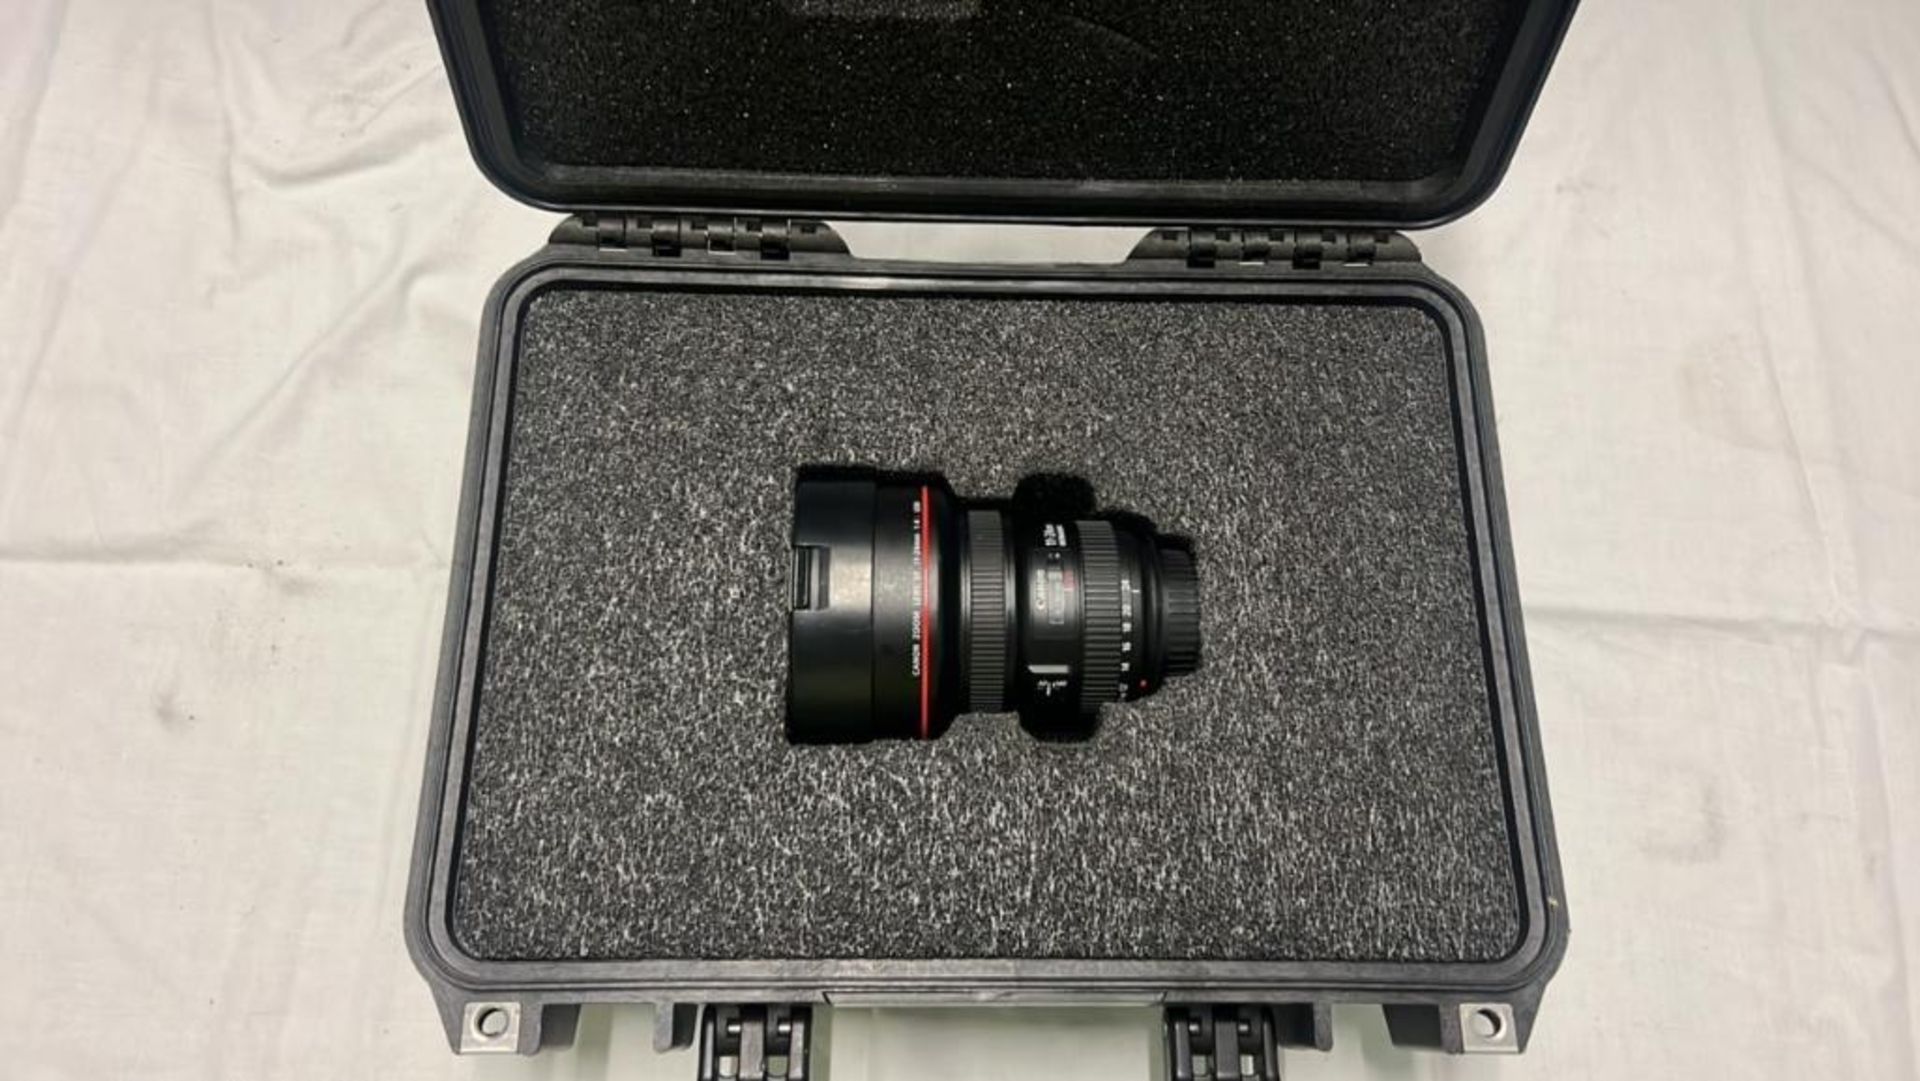 Canon EF 11-24mm f/4L USM Lens with PeliCase SN: 2910000270